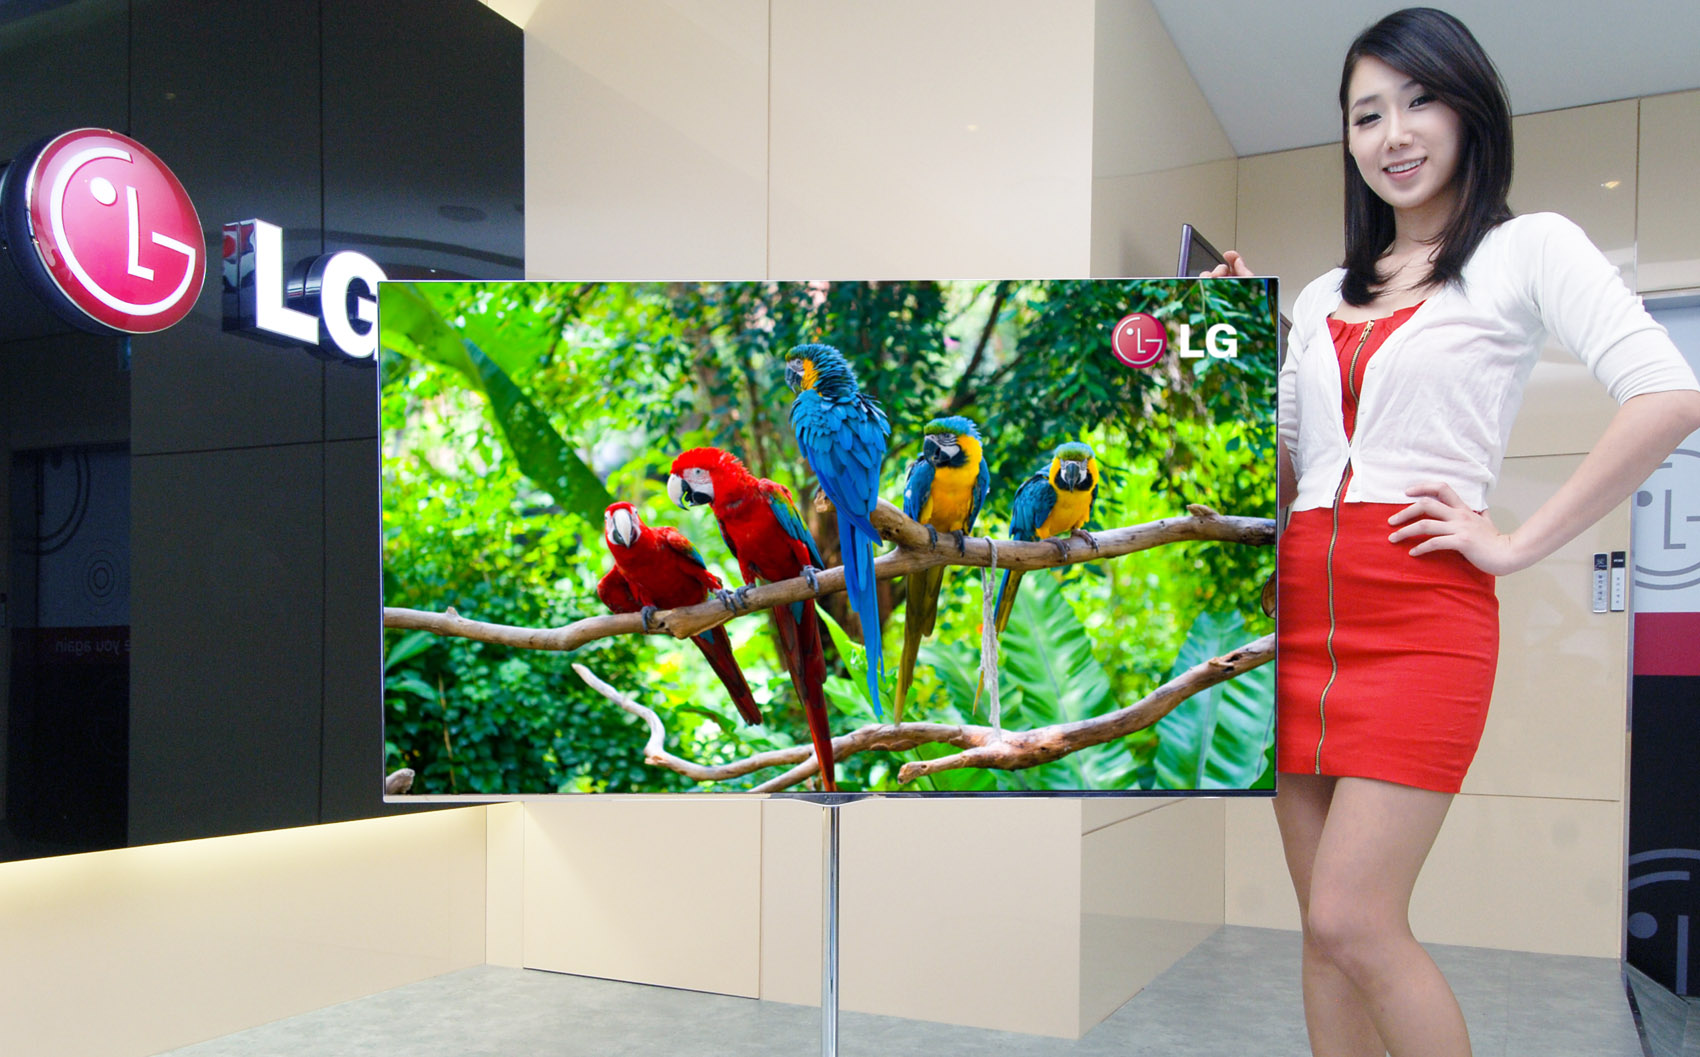 This OLED TV screen shows how lightweight and flexible the technology is, though don't expect OLED to make its way to large format quite yet.